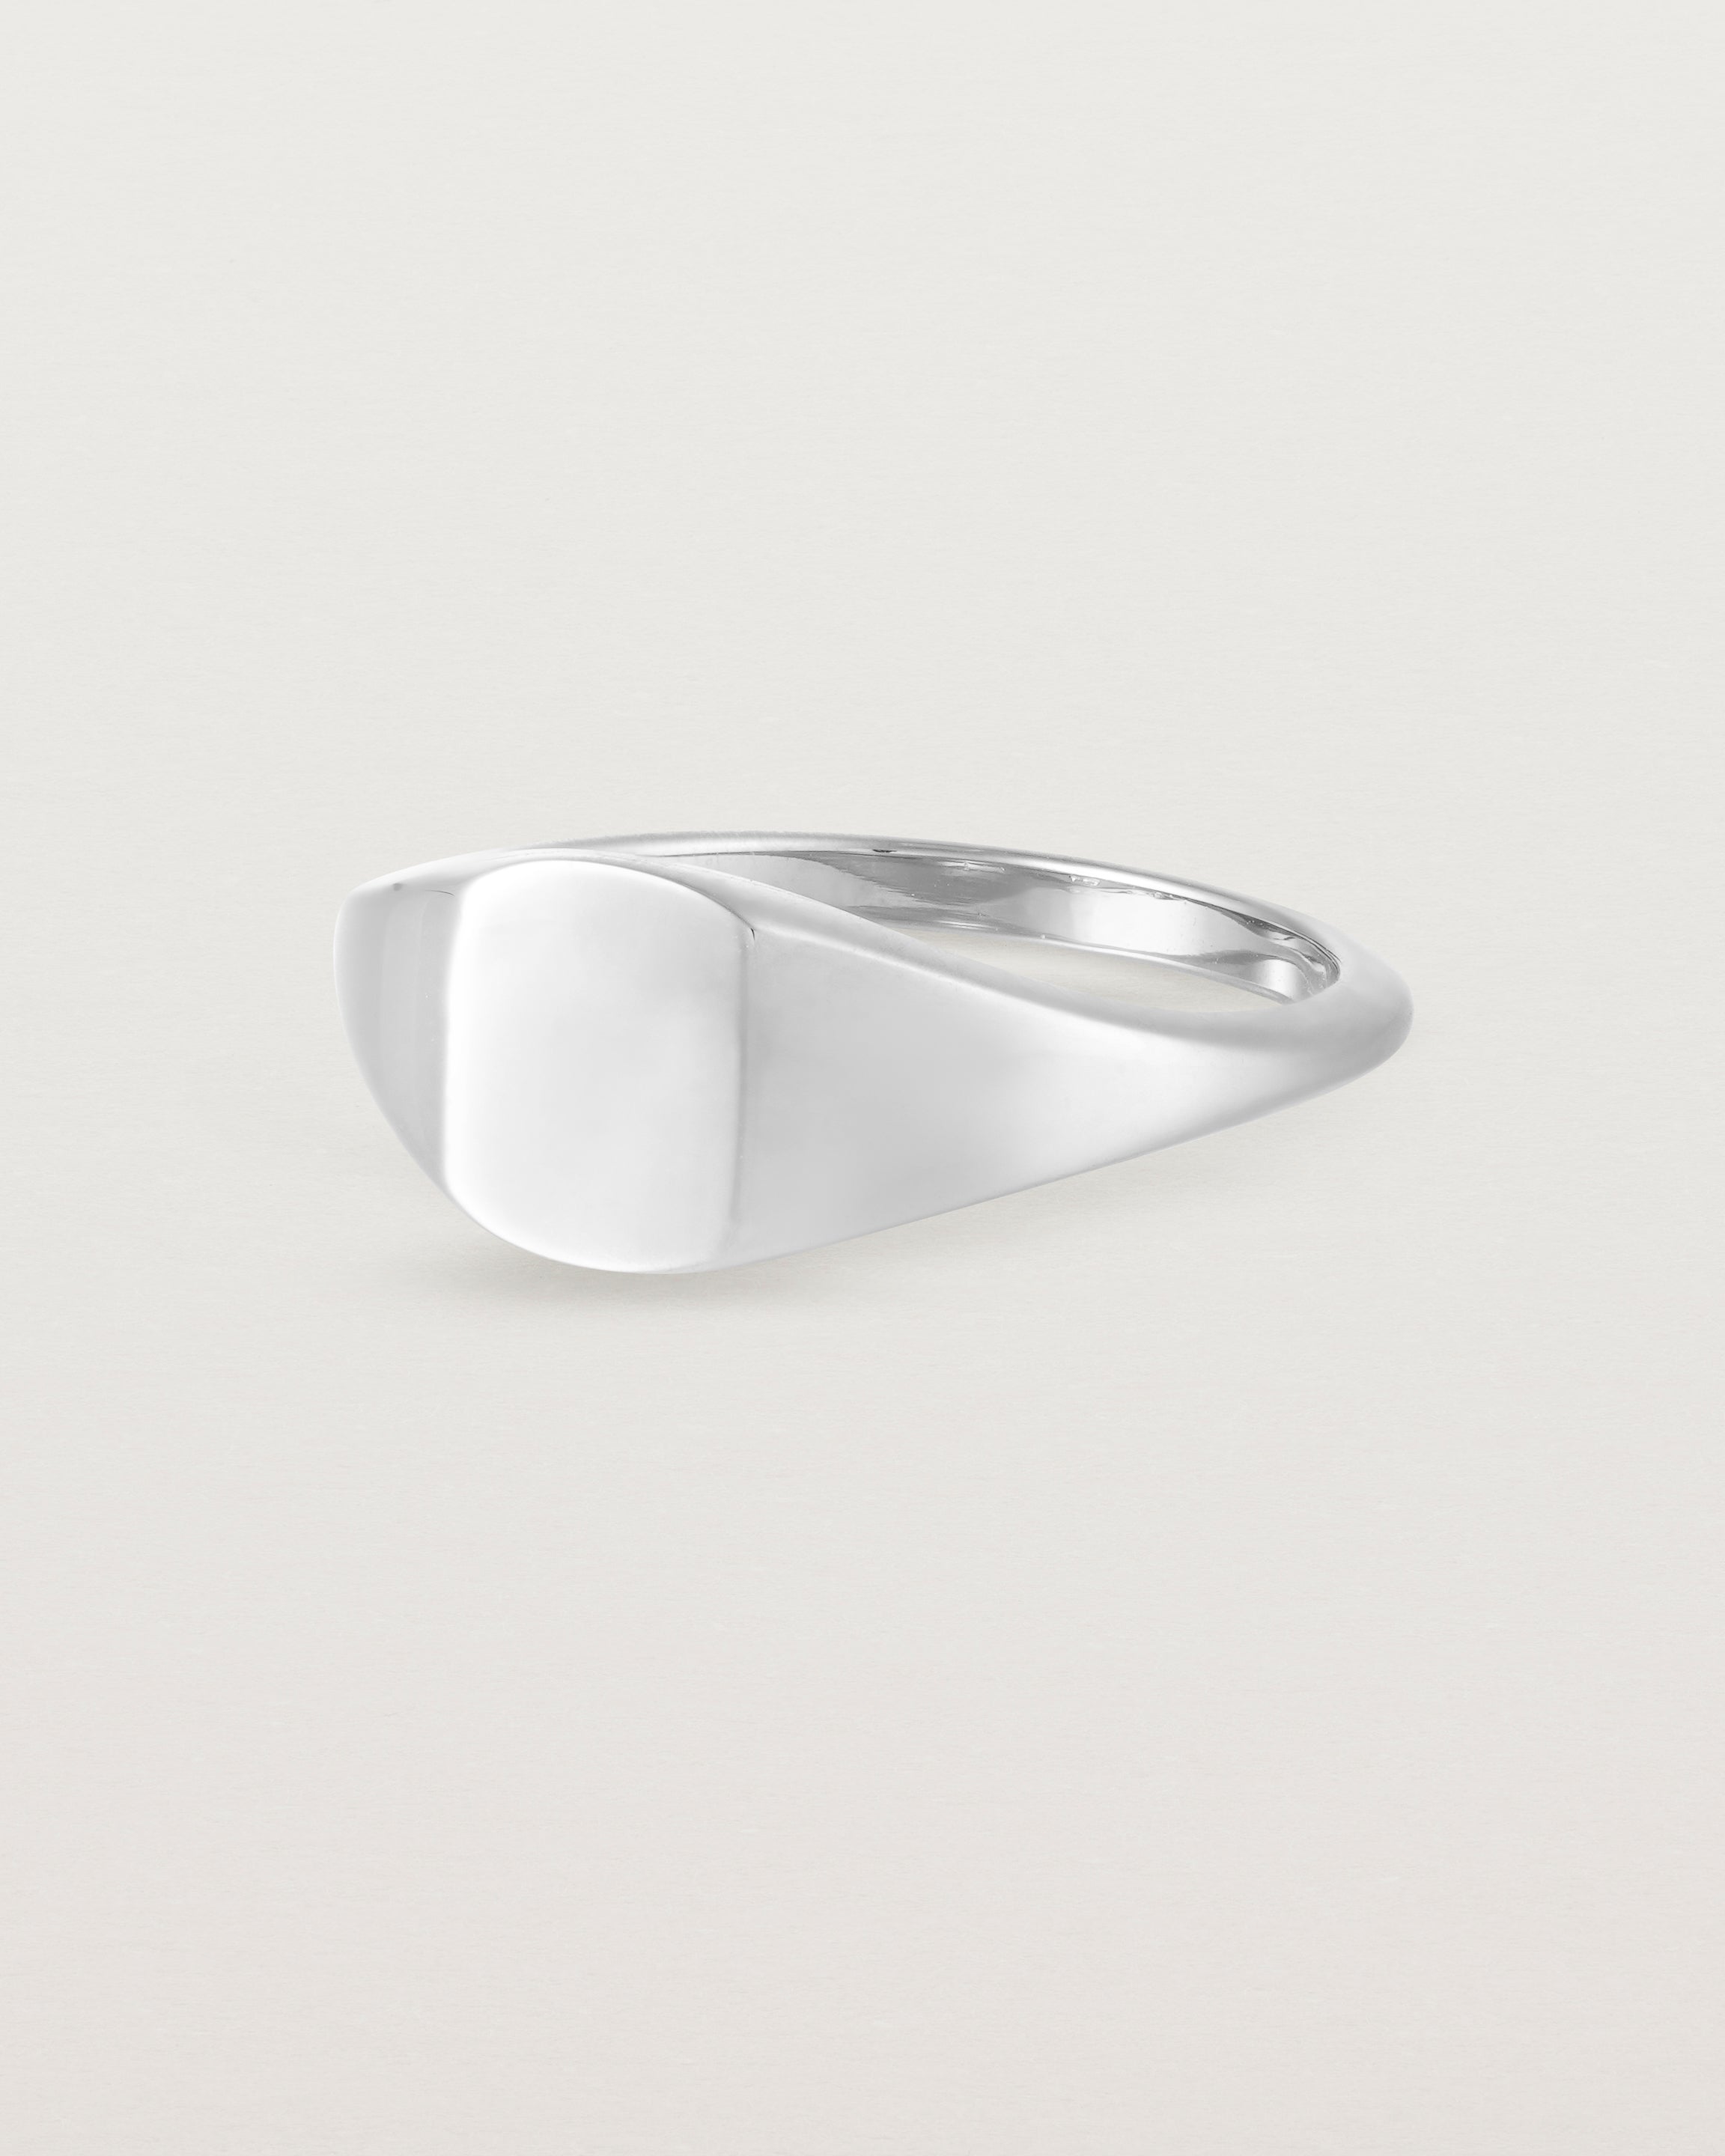 Angled view of a simple signet with an elongated rectangular face in white gold